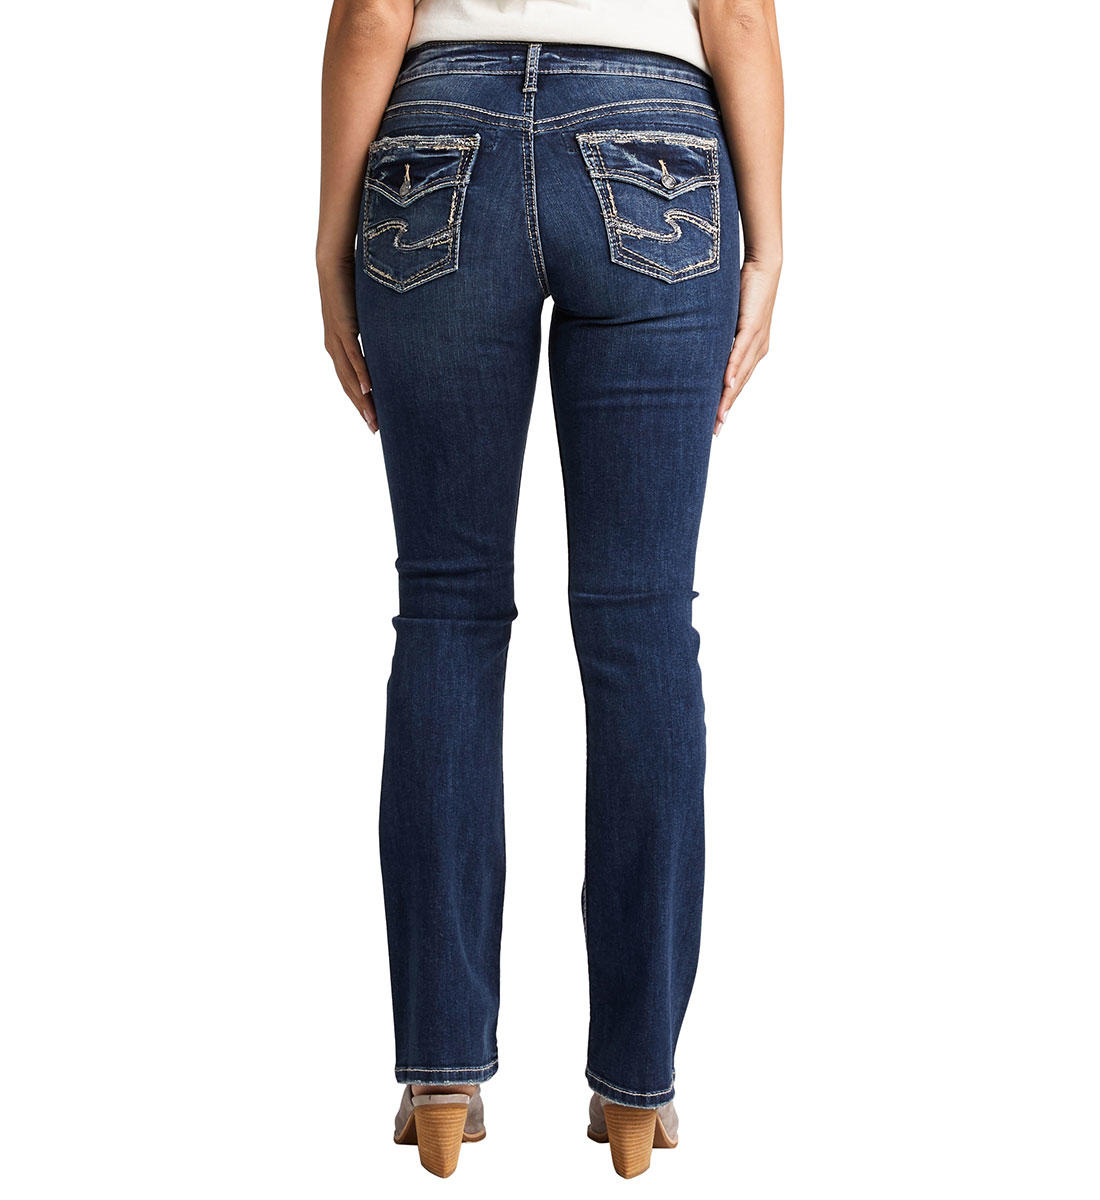 Silver Avery Slim Boot Jeans   Boasting a contemporary silhouette, Silver Avery Slim Boot Jeans provide an innovative high-rise, slim boot cut for an elegant modern look. Their Power Stretch Indigo Denim ensures a comfortable, curvaceous fit for all ladies.